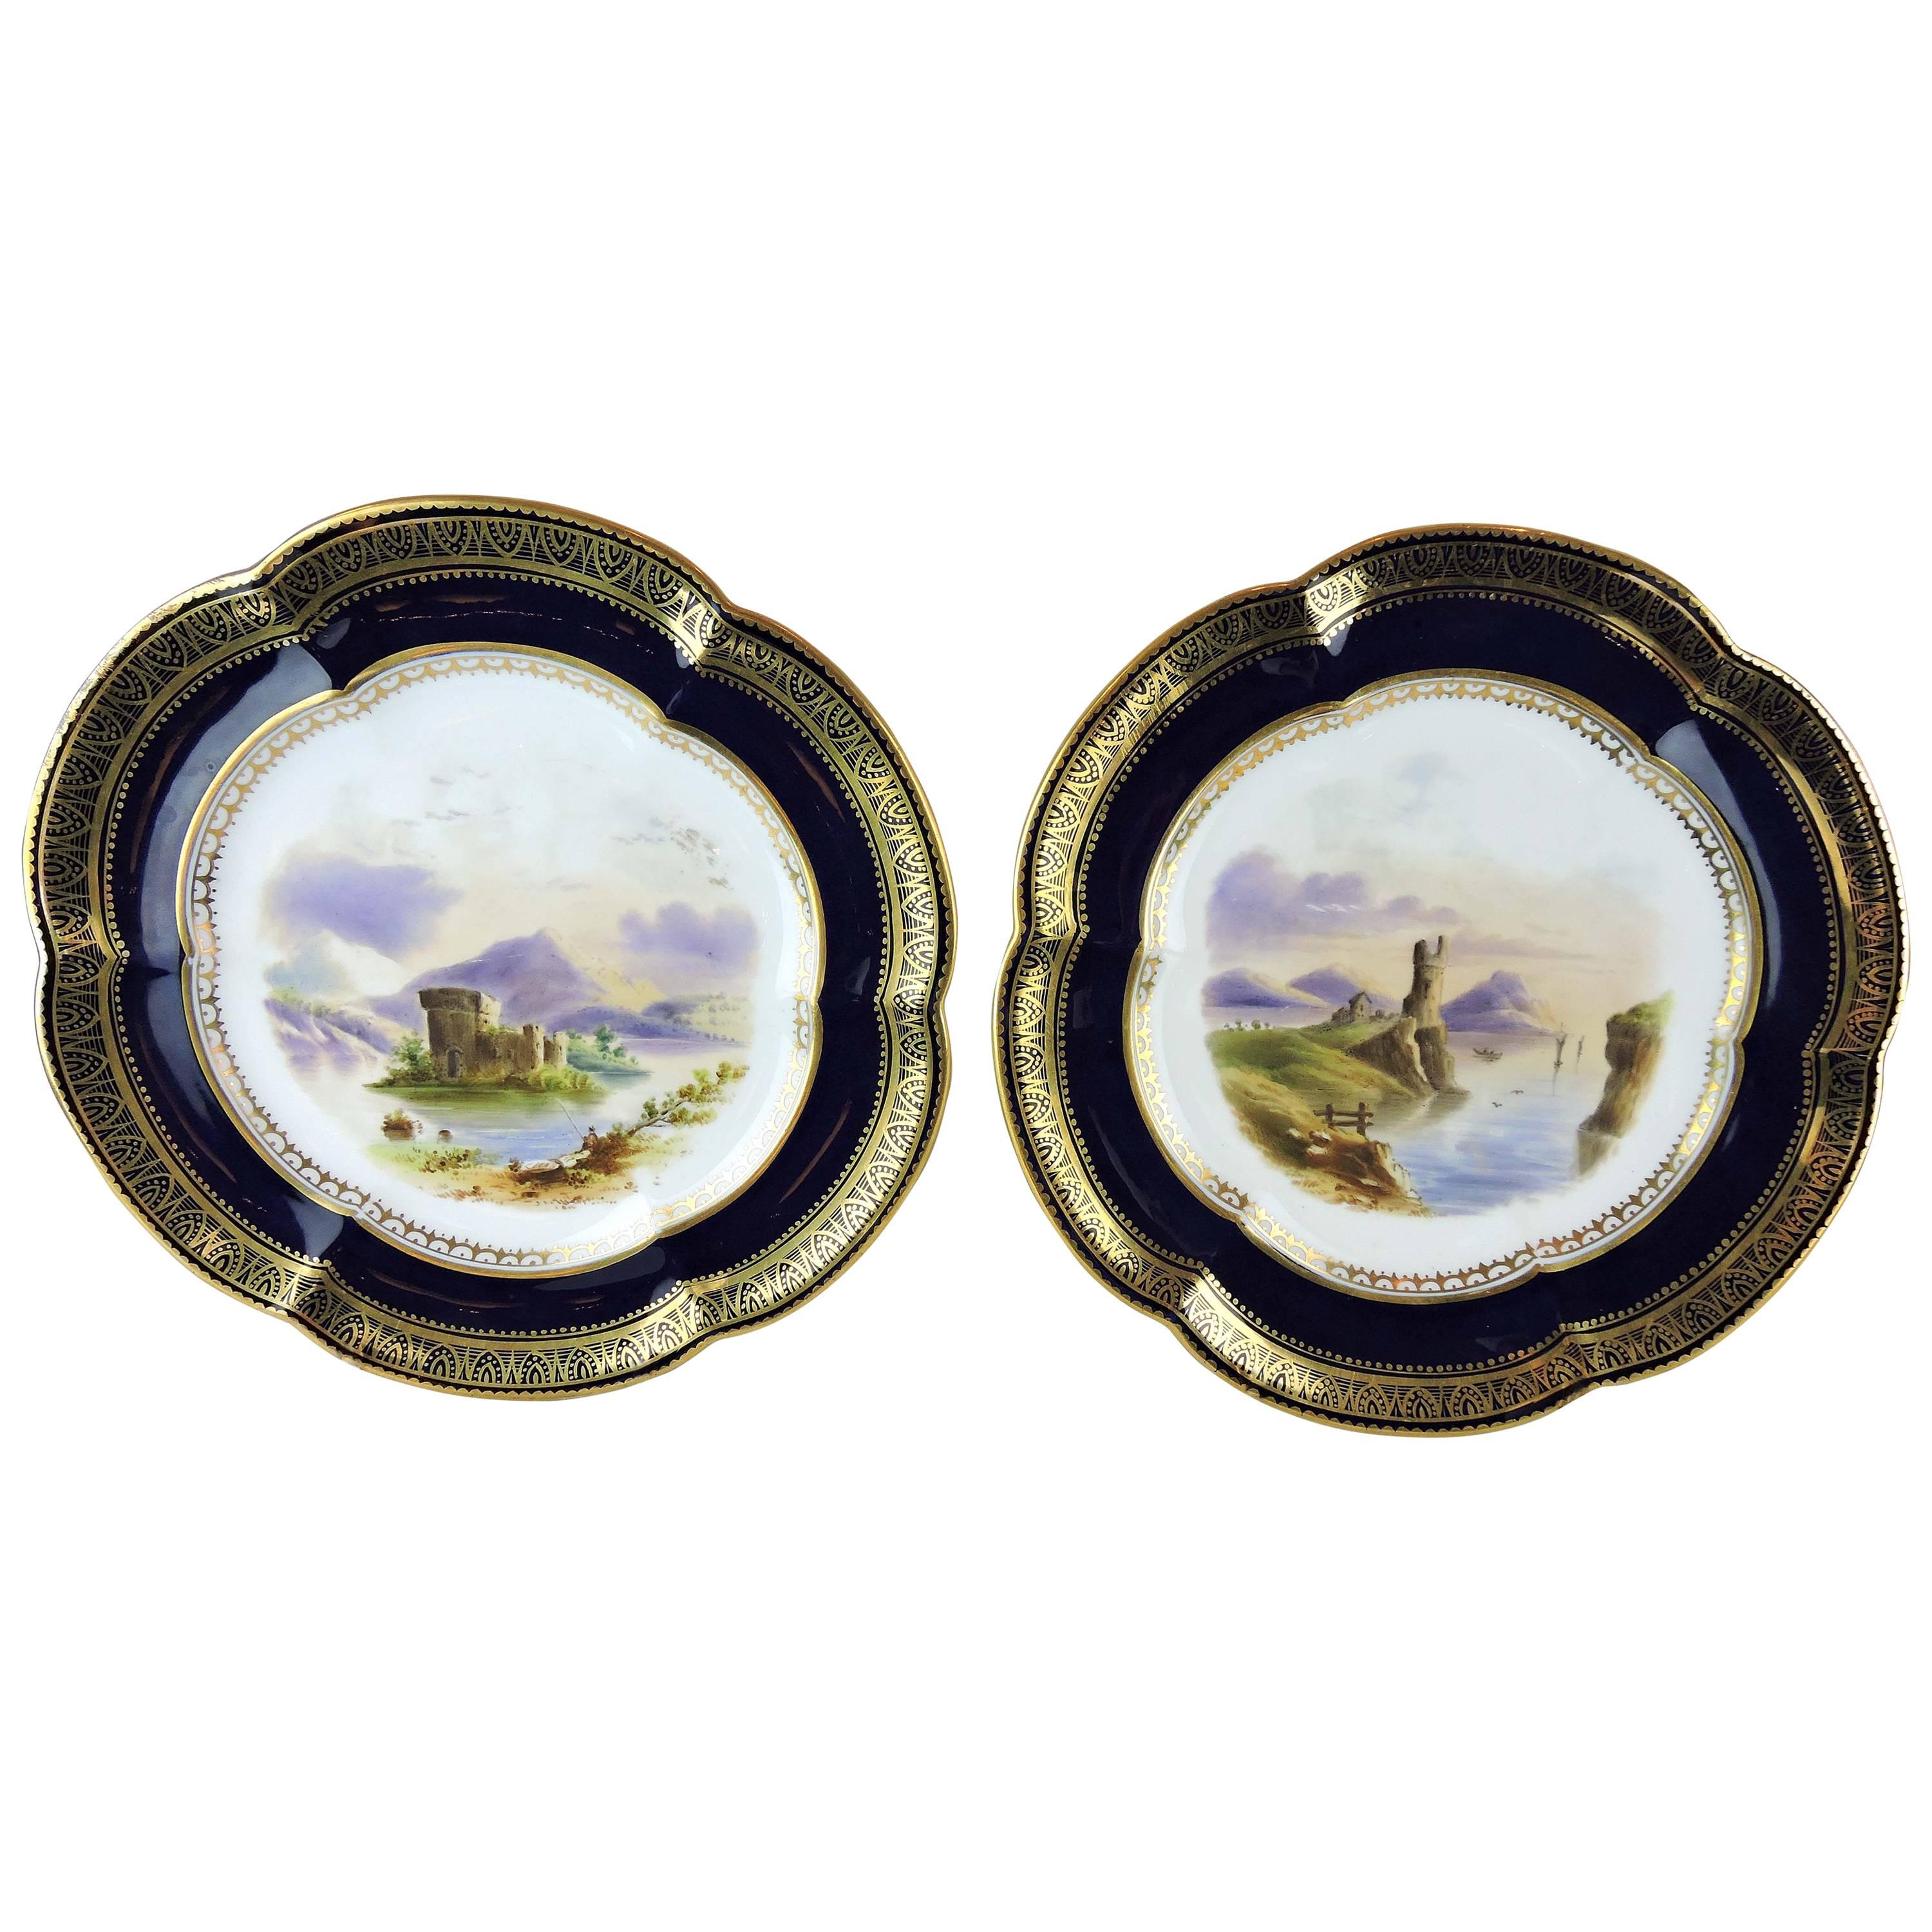 Pair of Early Spode Plates with Pastoral Landscapes by Josiah Spode For Sale